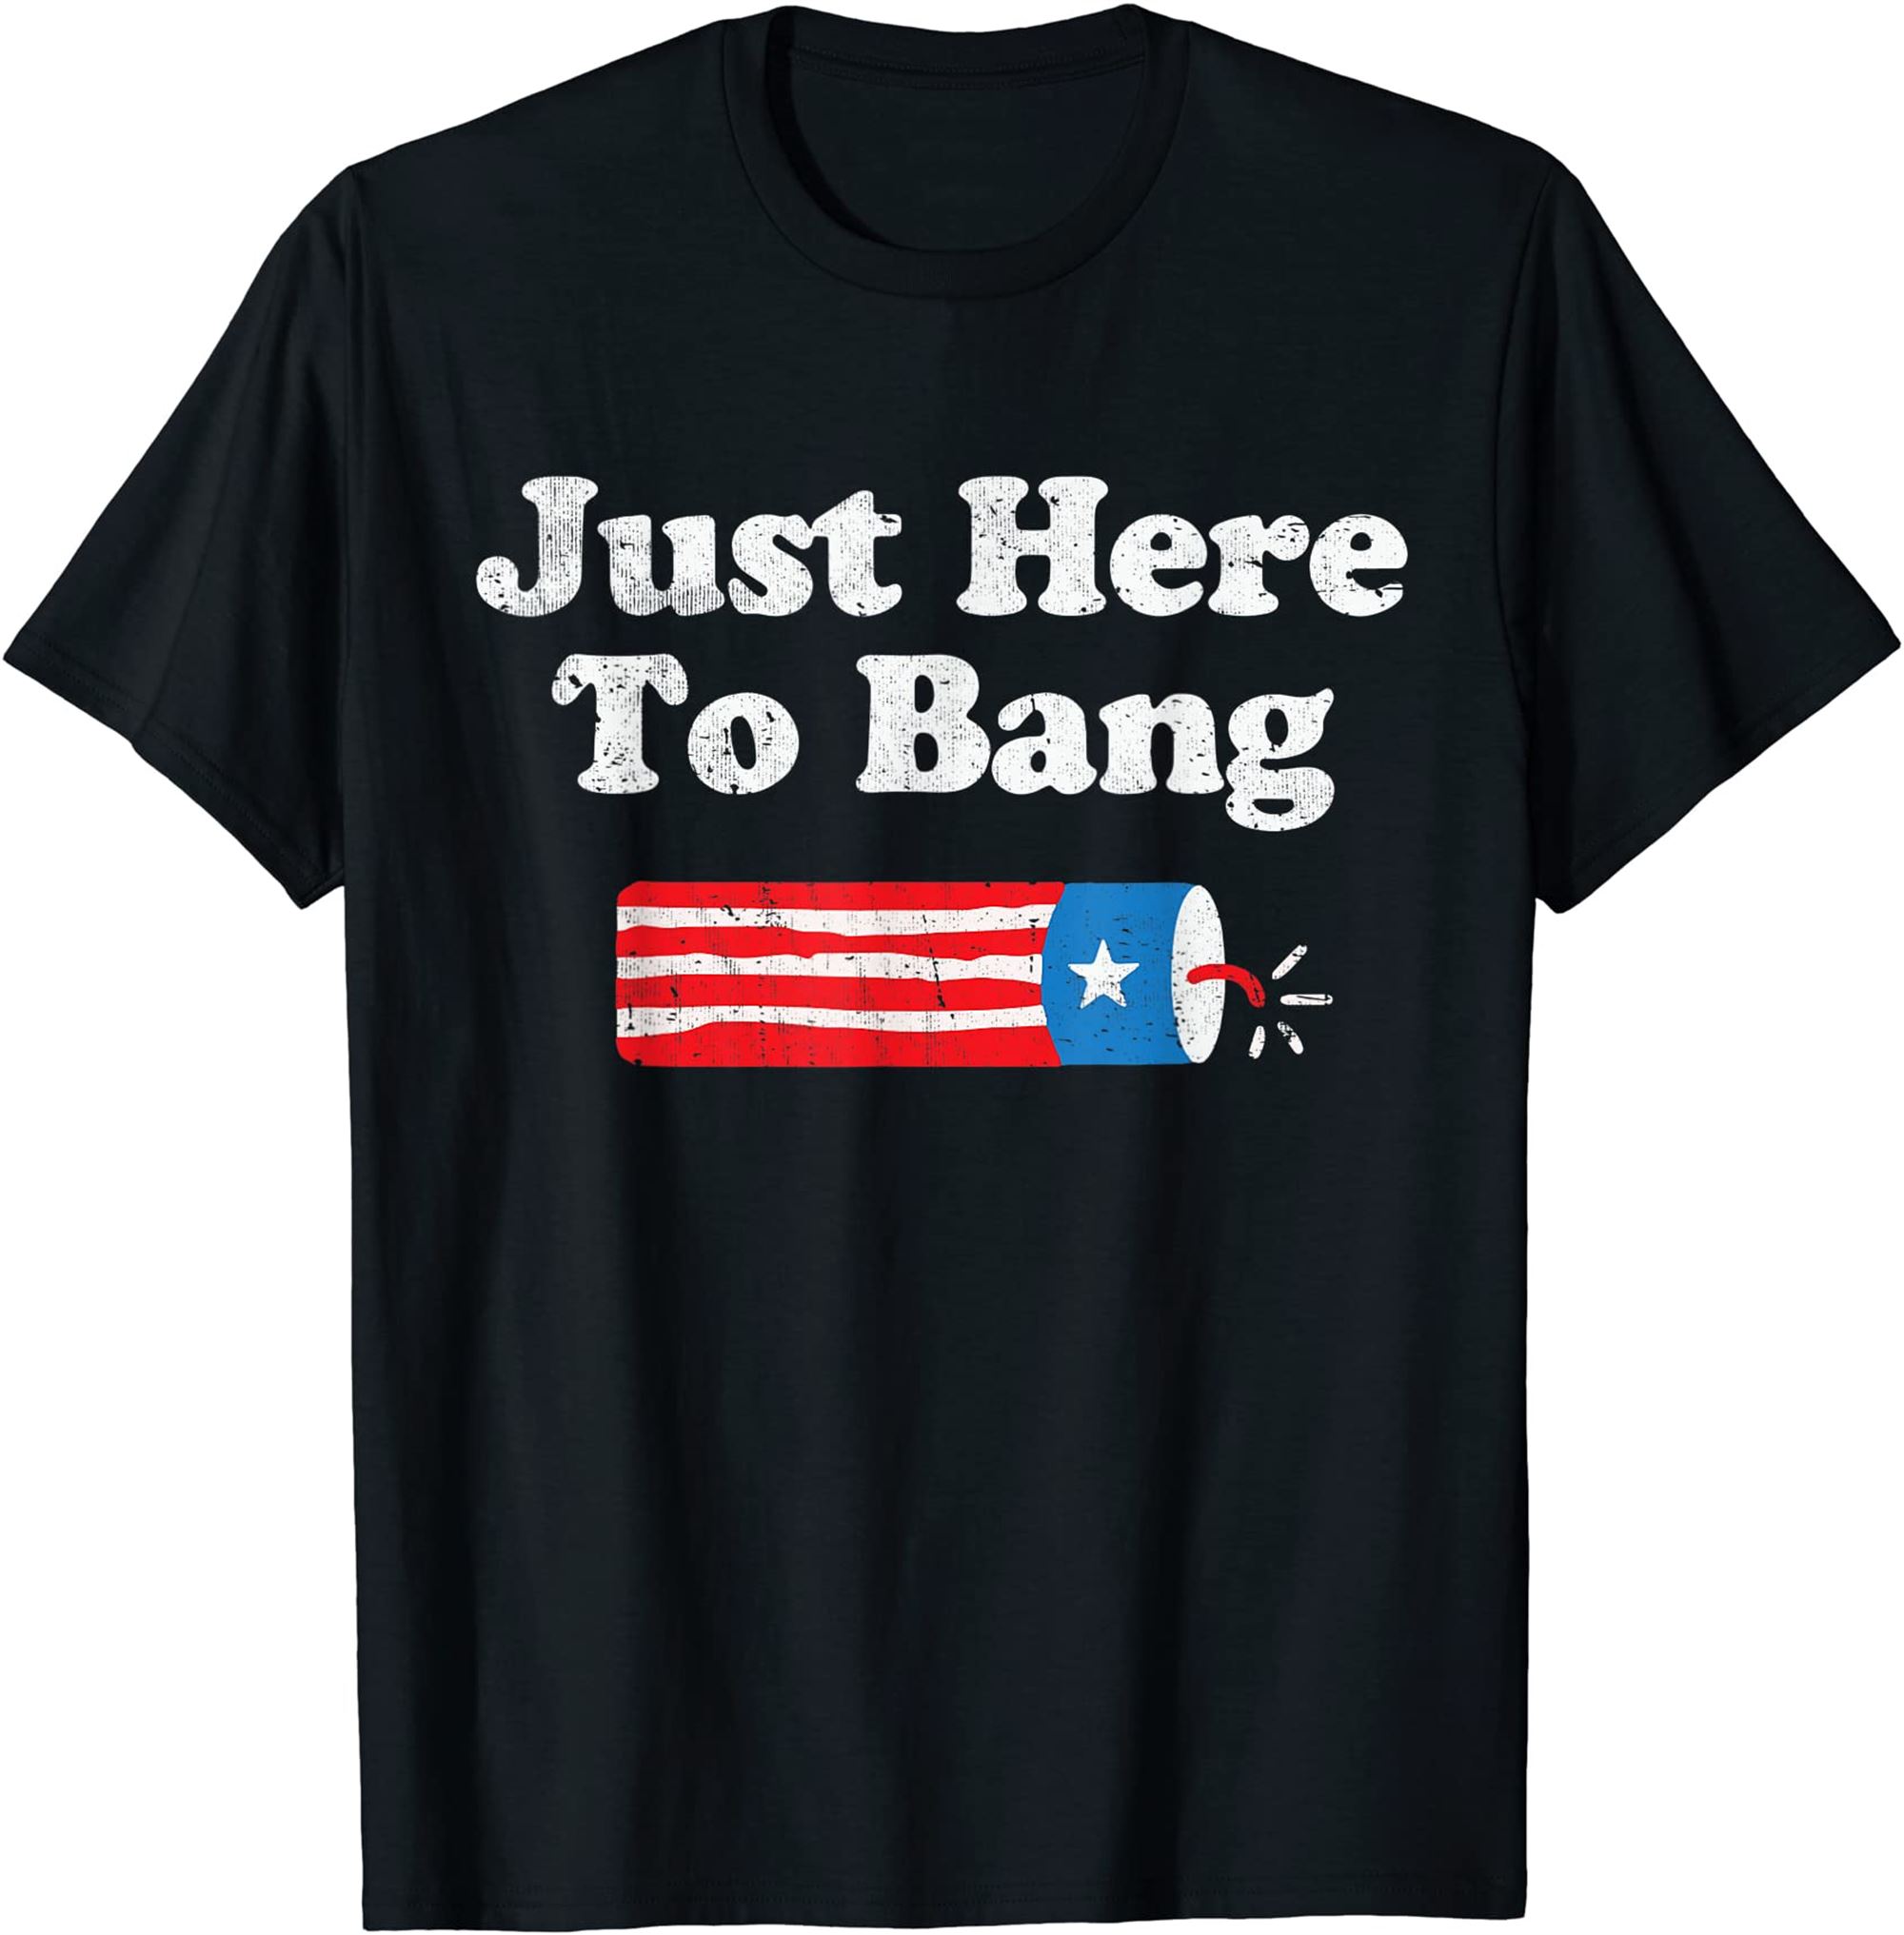 Just Here To Bang American Flag Fireworks Funny 4th Of July T-shirt Size Up To 5xl